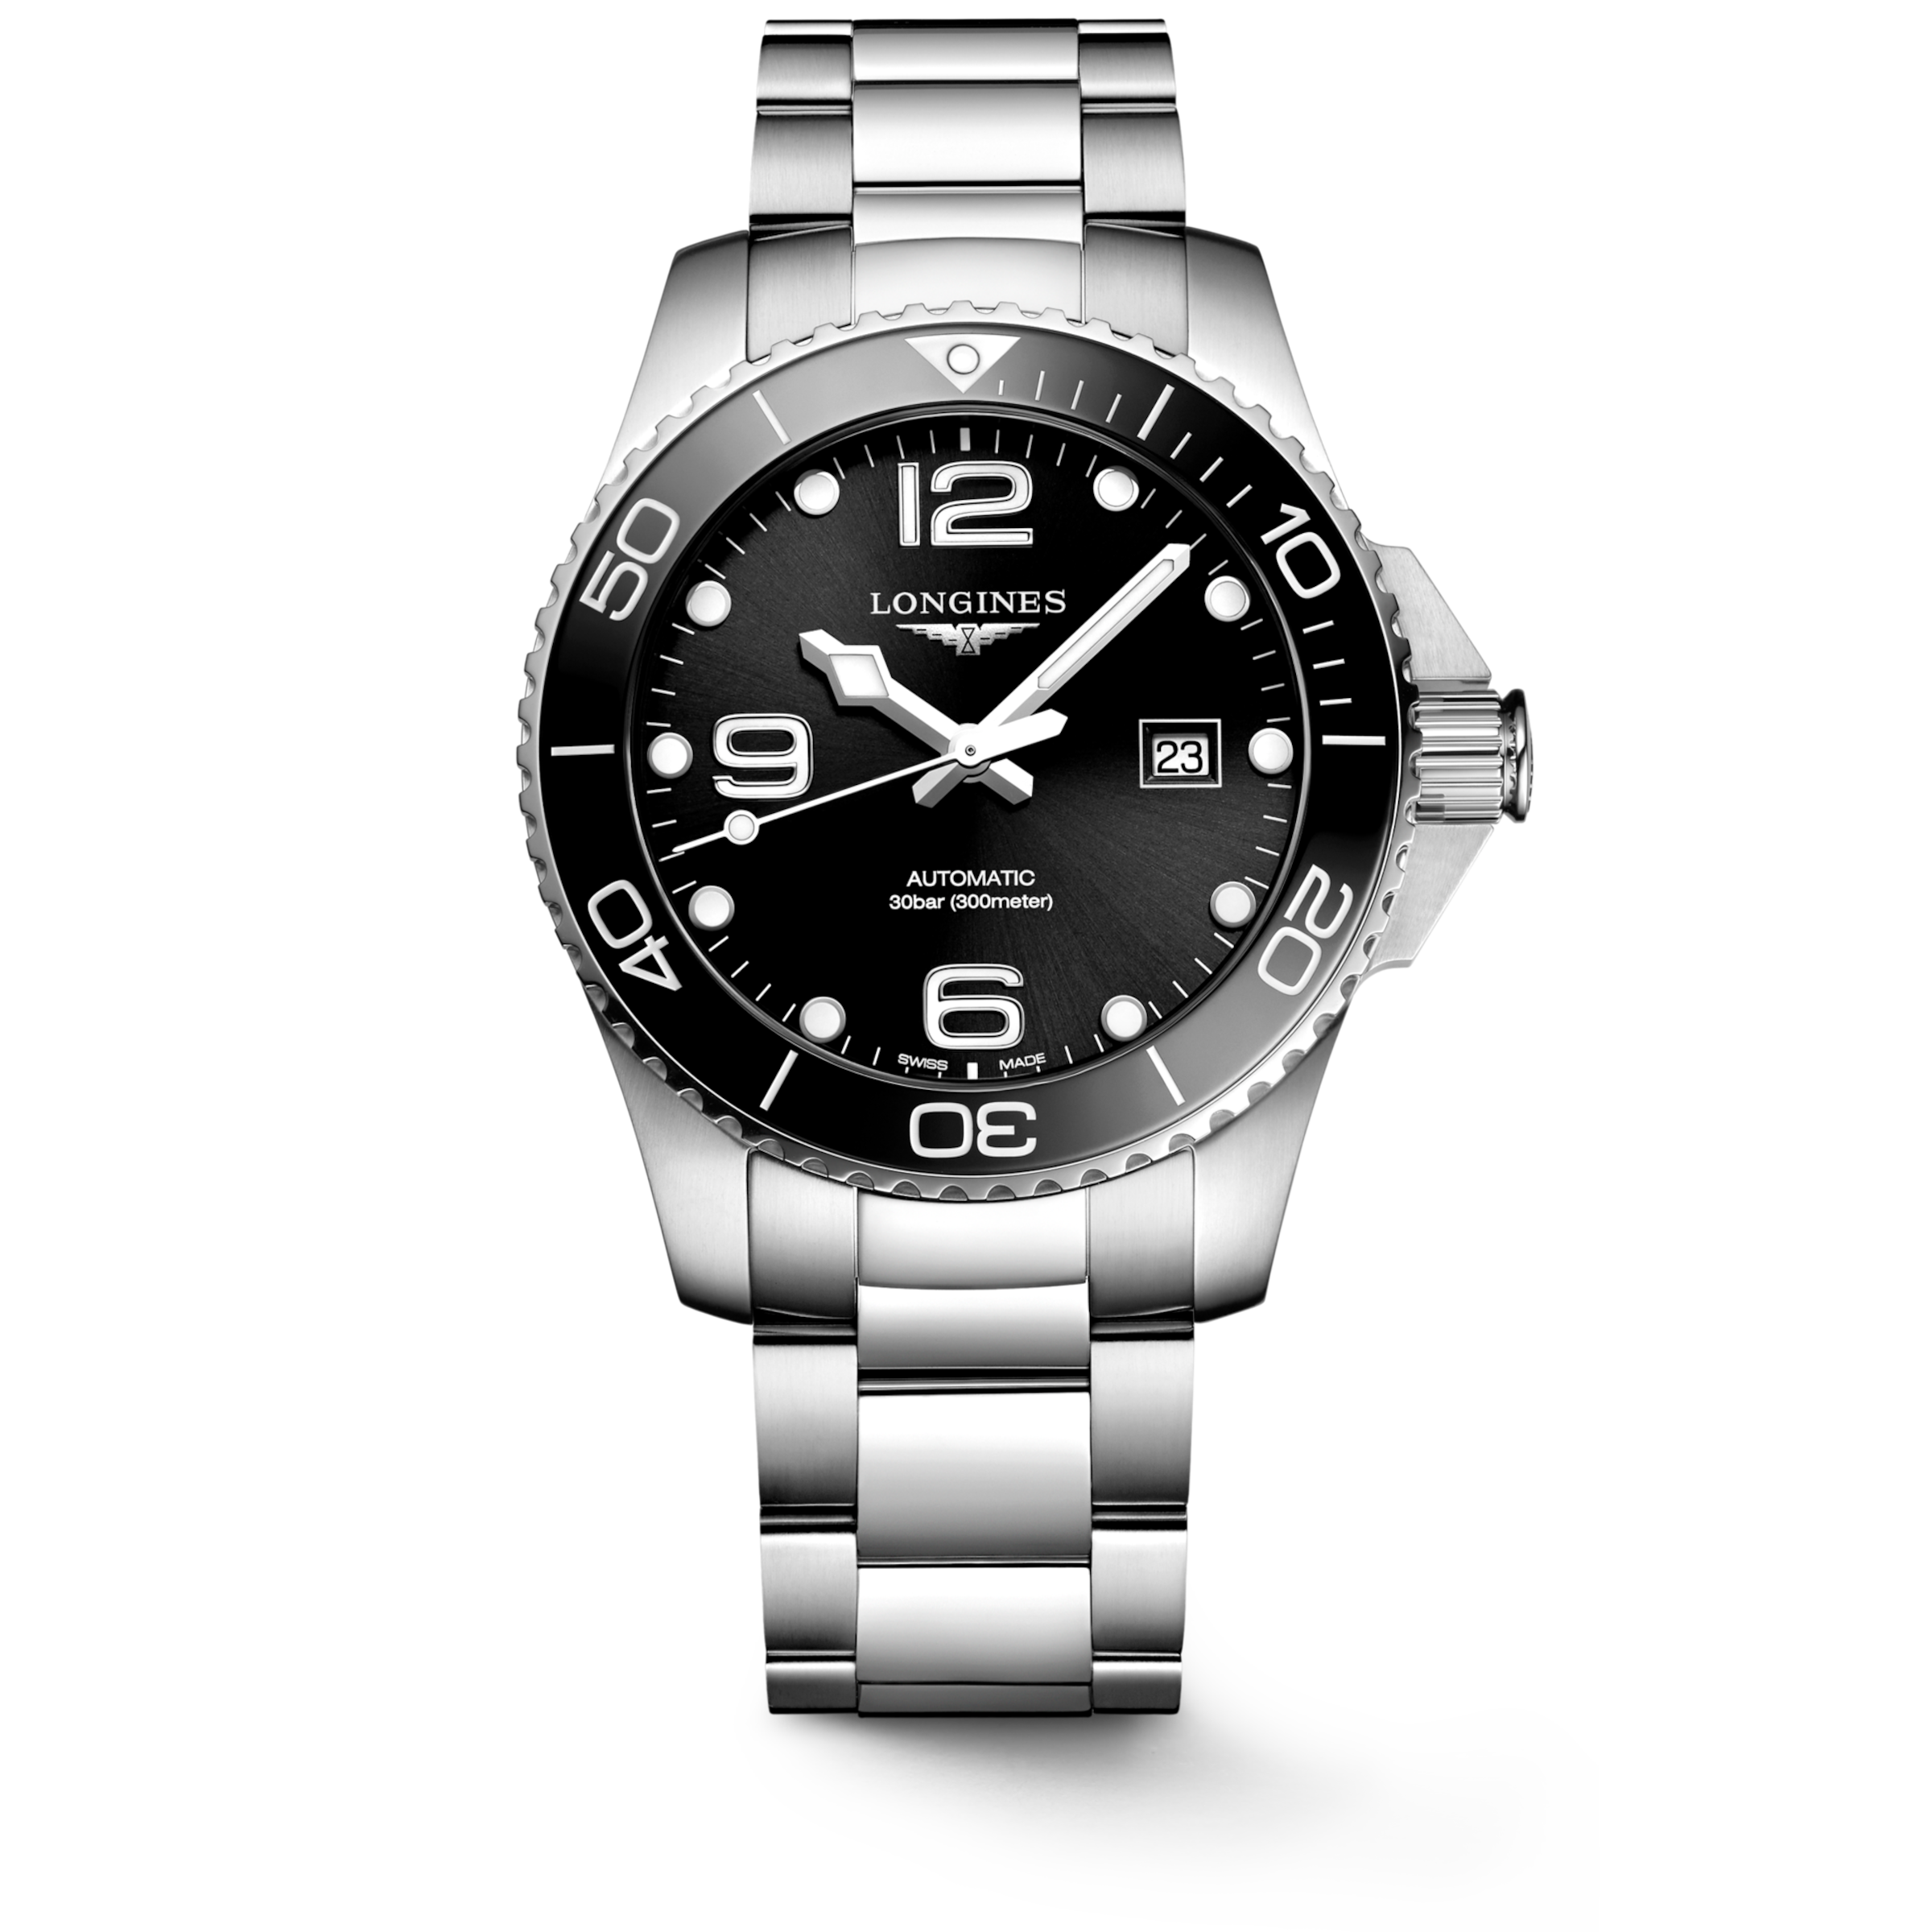 Longines HYDROCONQUEST Automatic Stainless steel and ceramic bezel Watch - L3.782.4.56.6